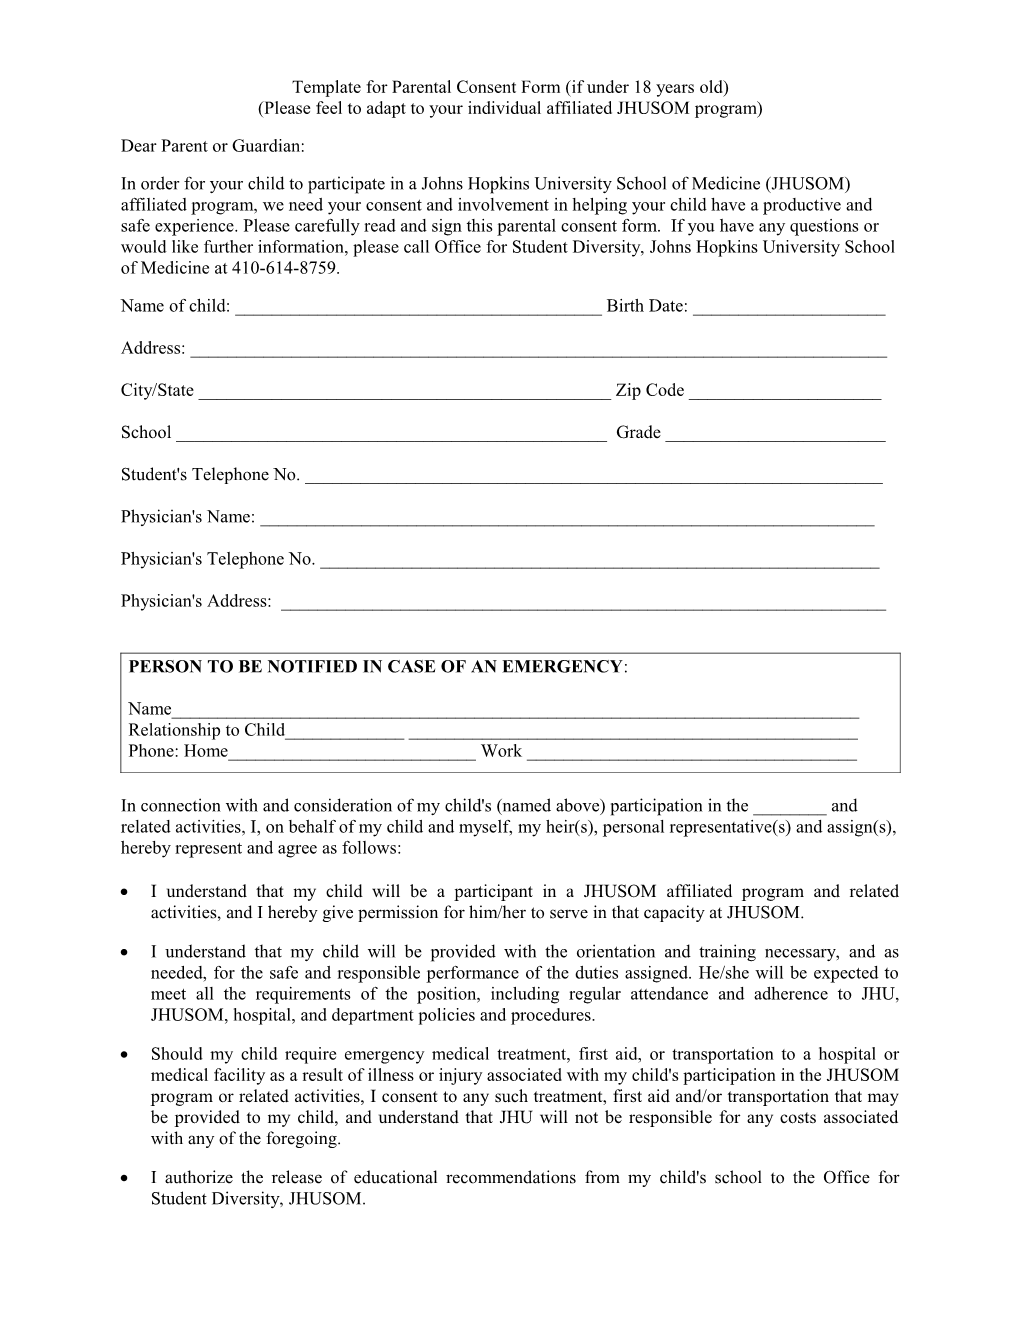 Template for Parental Consent Form (If Under 18 Years Old) (Please Feel to Adapt to Your